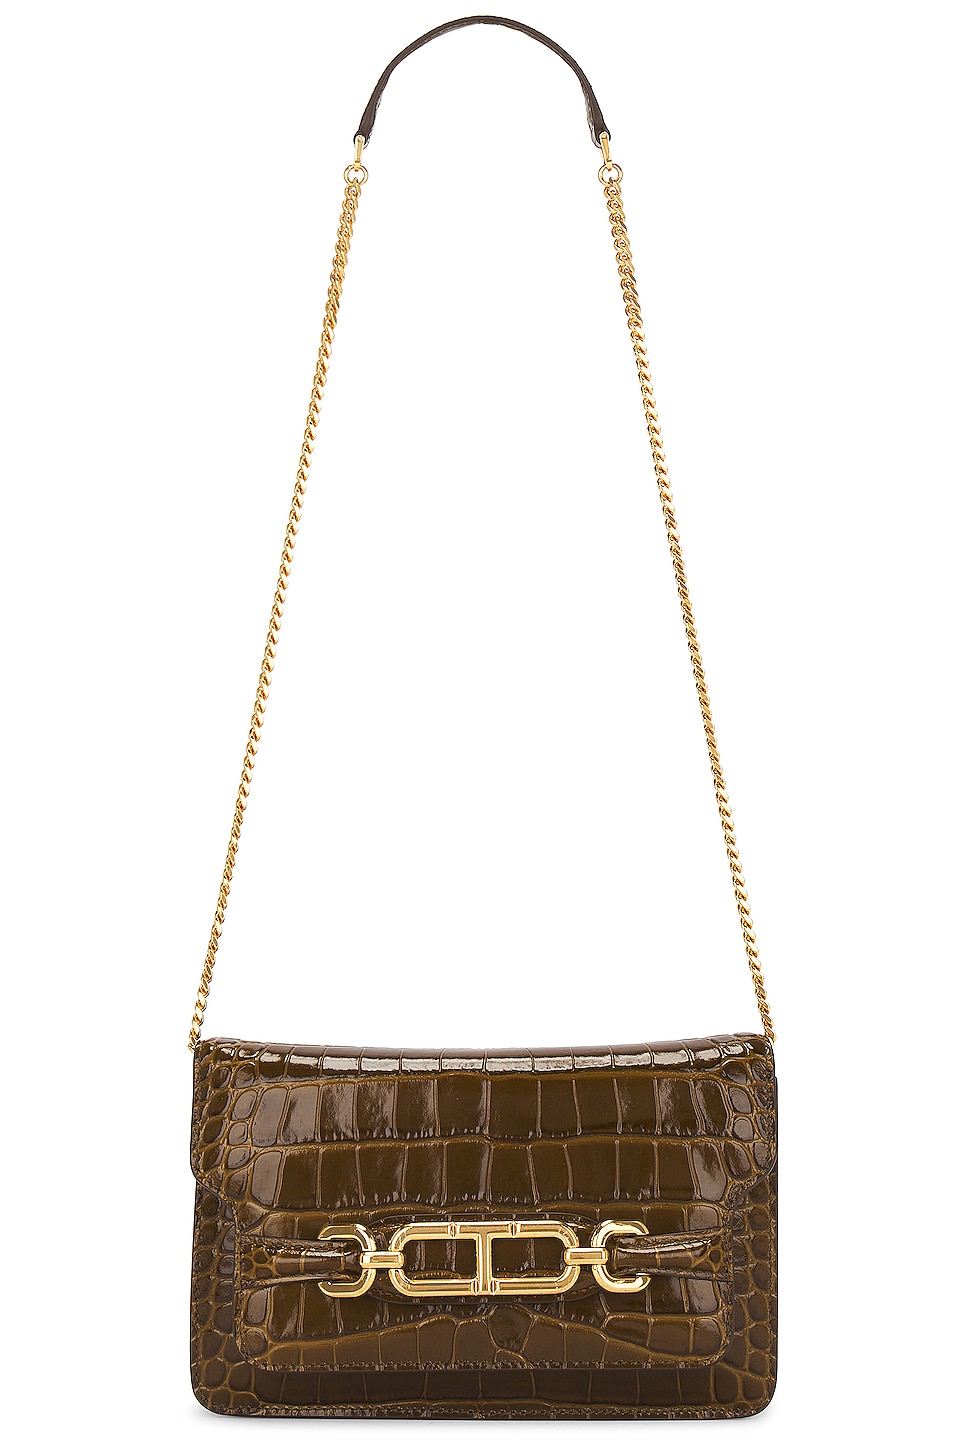 Stamped Croc Whitney Small Shoulder Bag in Tan